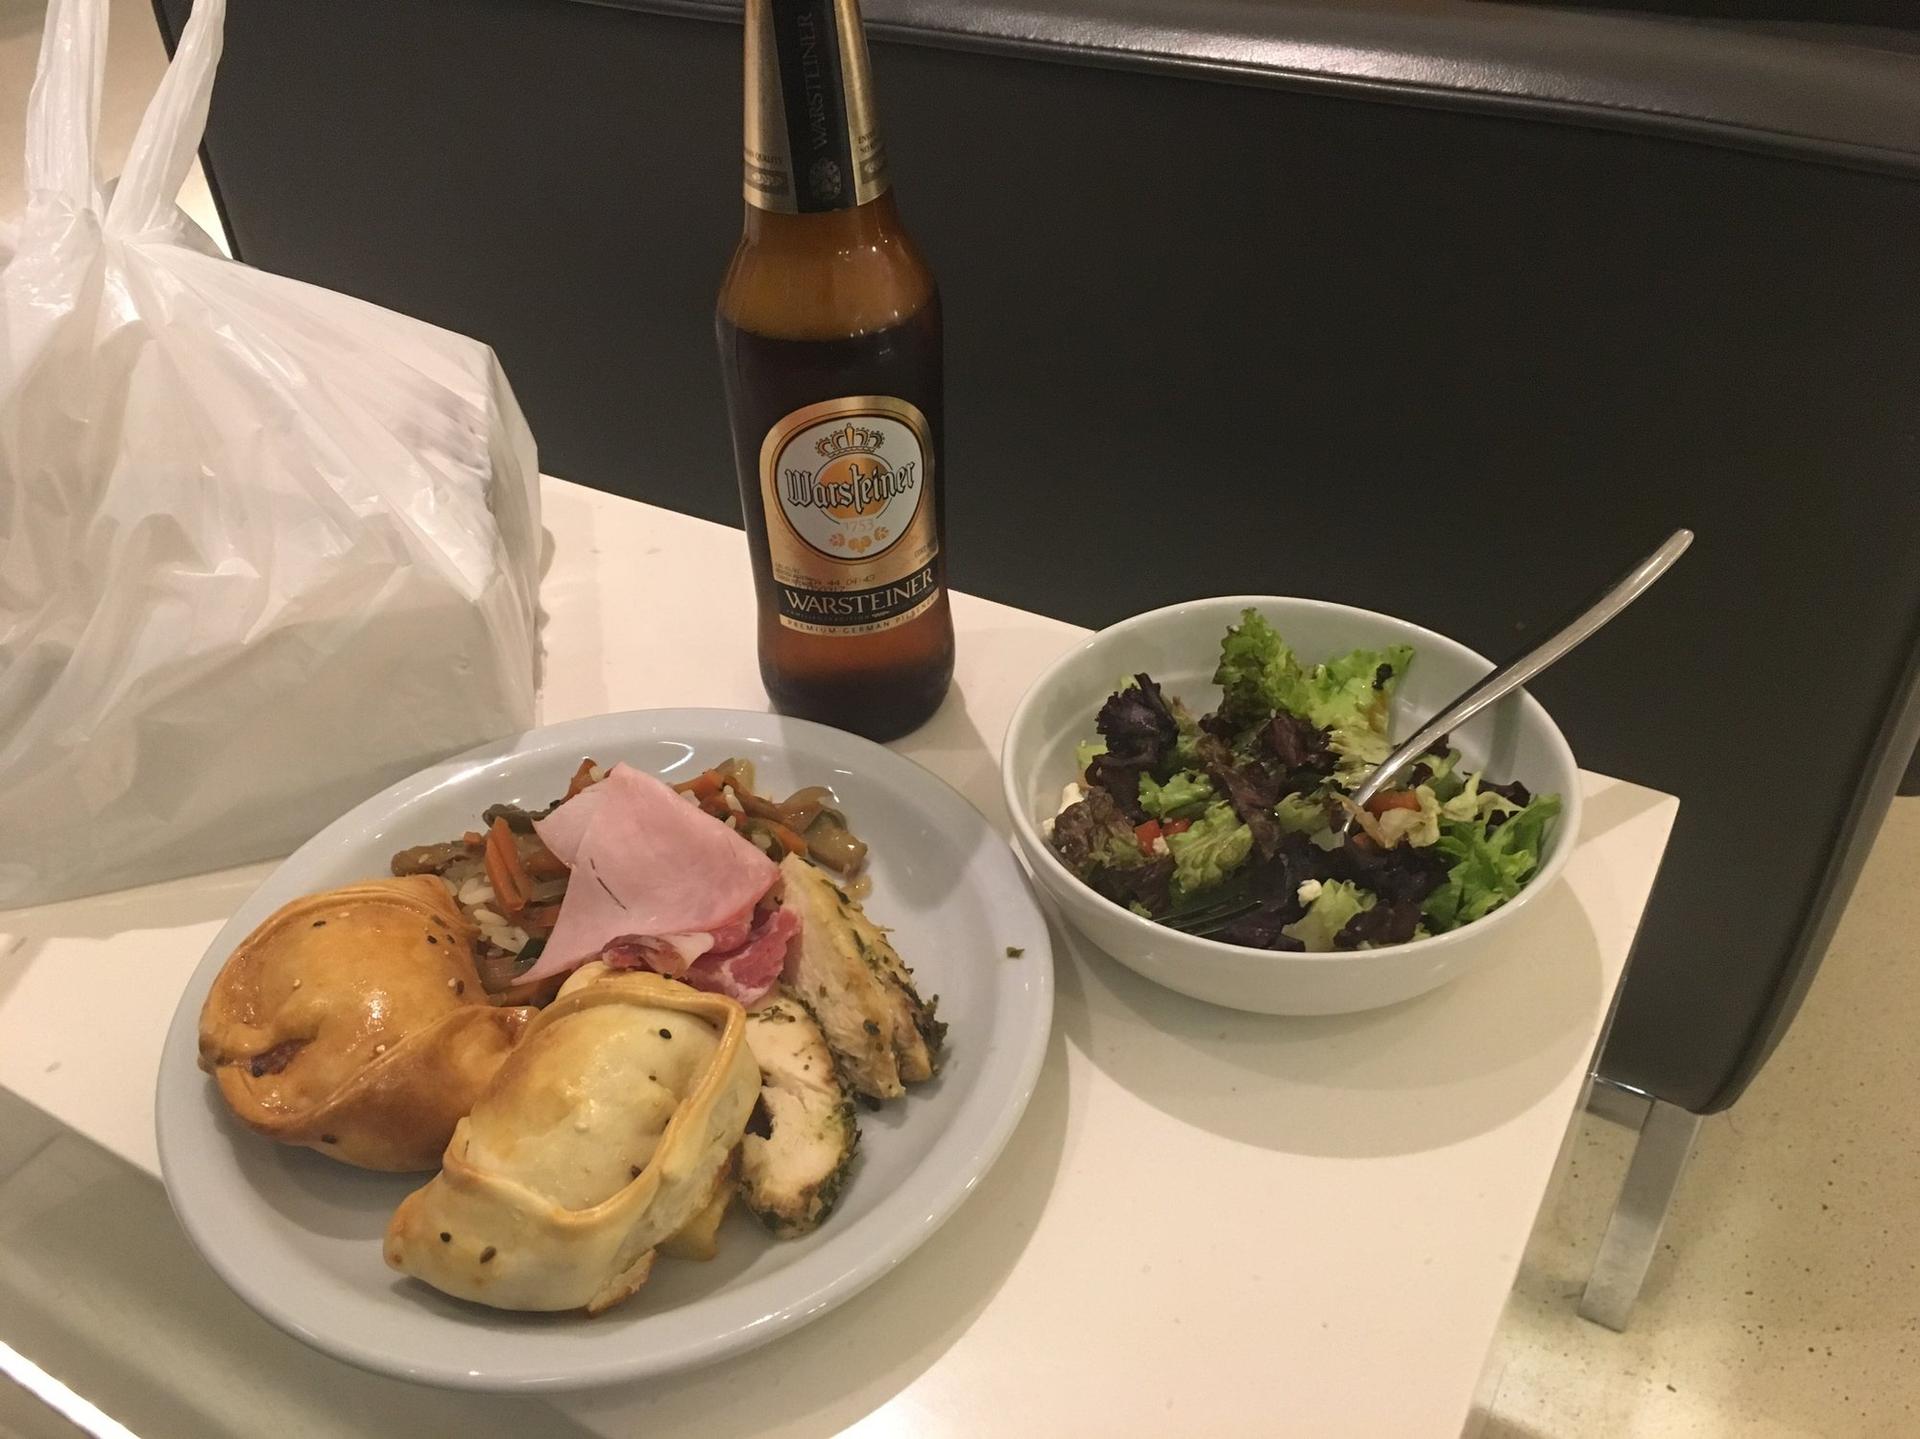 American Airlines Admirals Club & Iberia VIP Lounge image 11 of 18